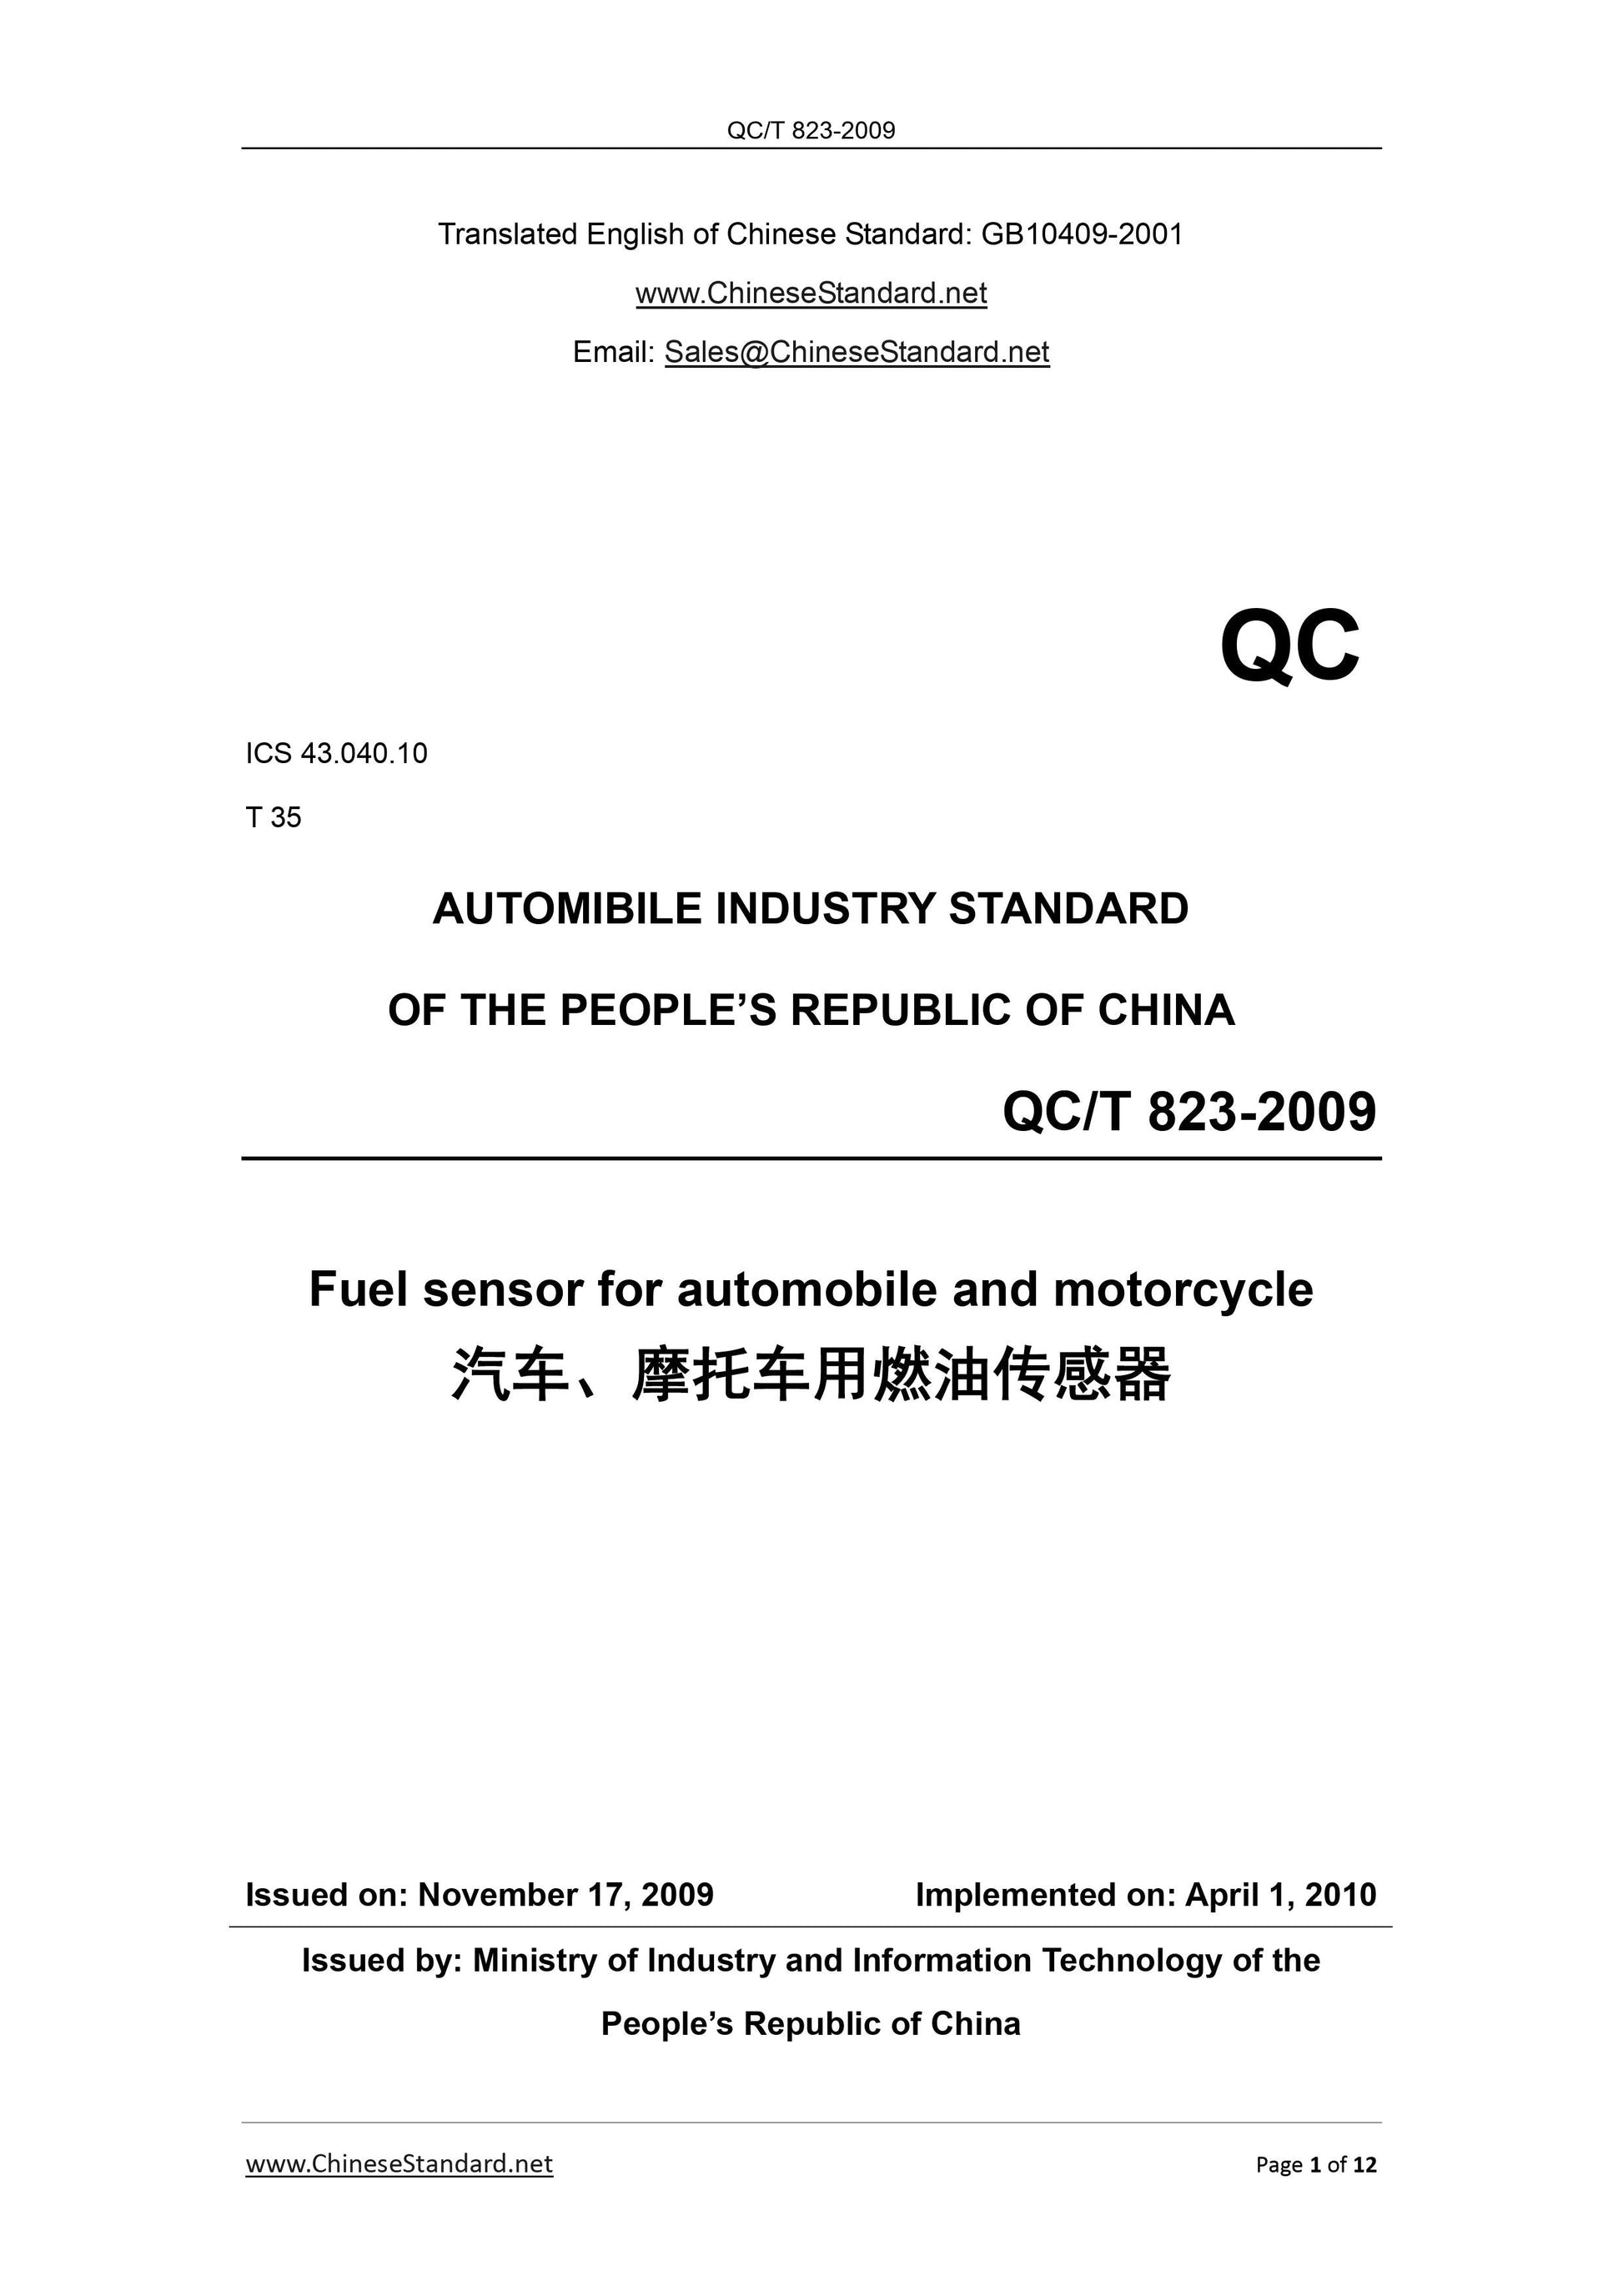 QC/T 823-2009 Page 1